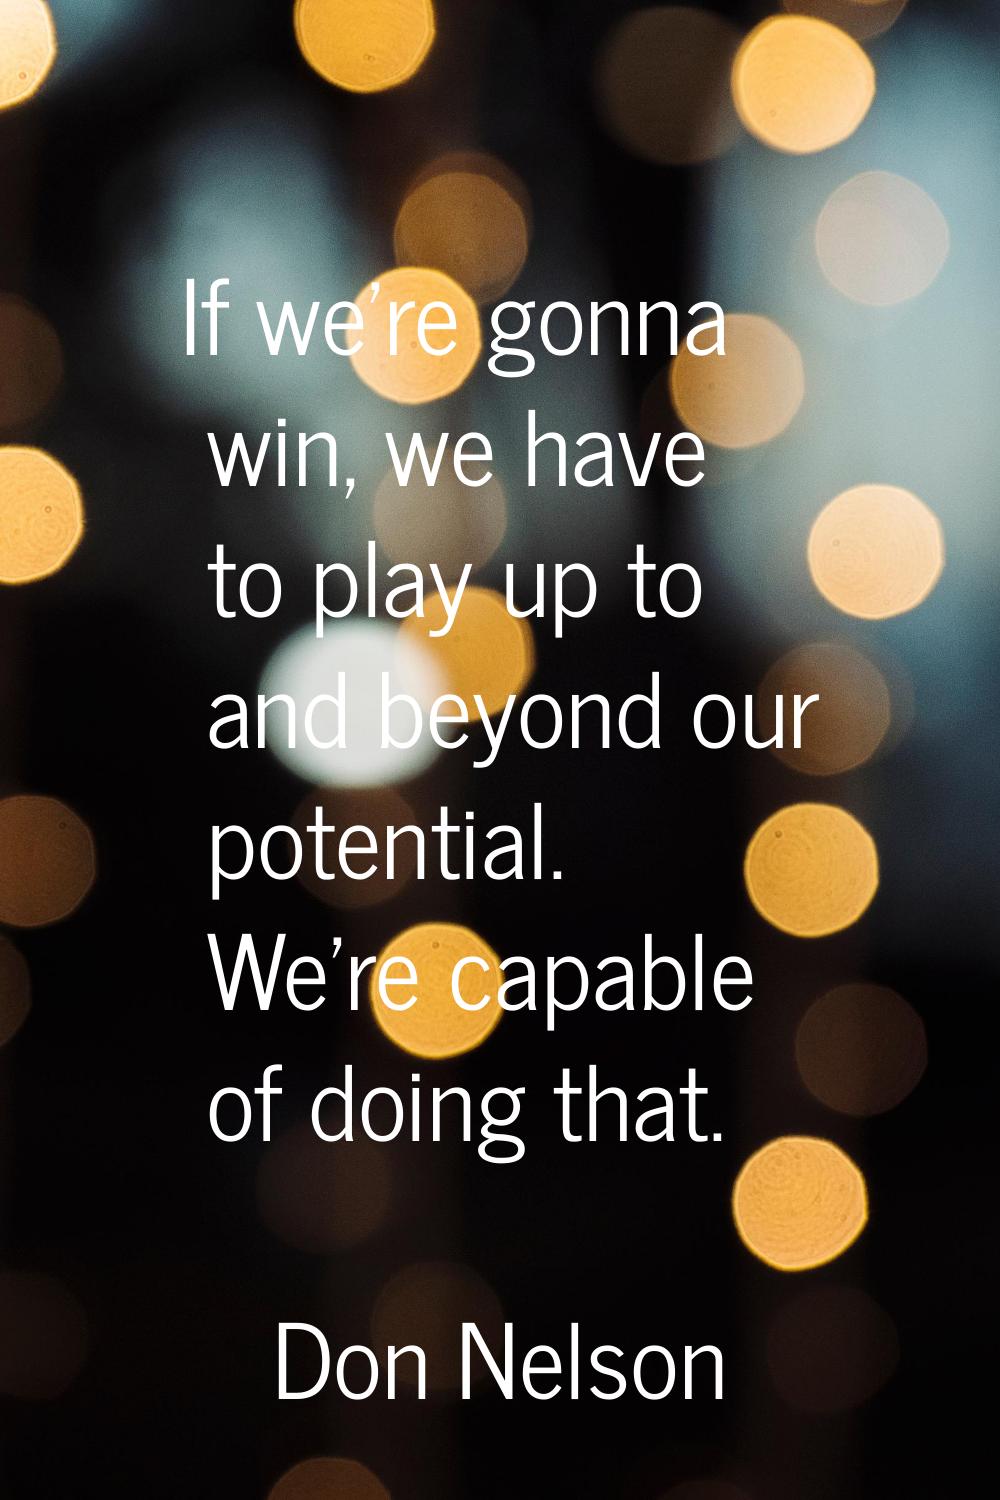 If we're gonna win, we have to play up to and beyond our potential. We're capable of doing that.